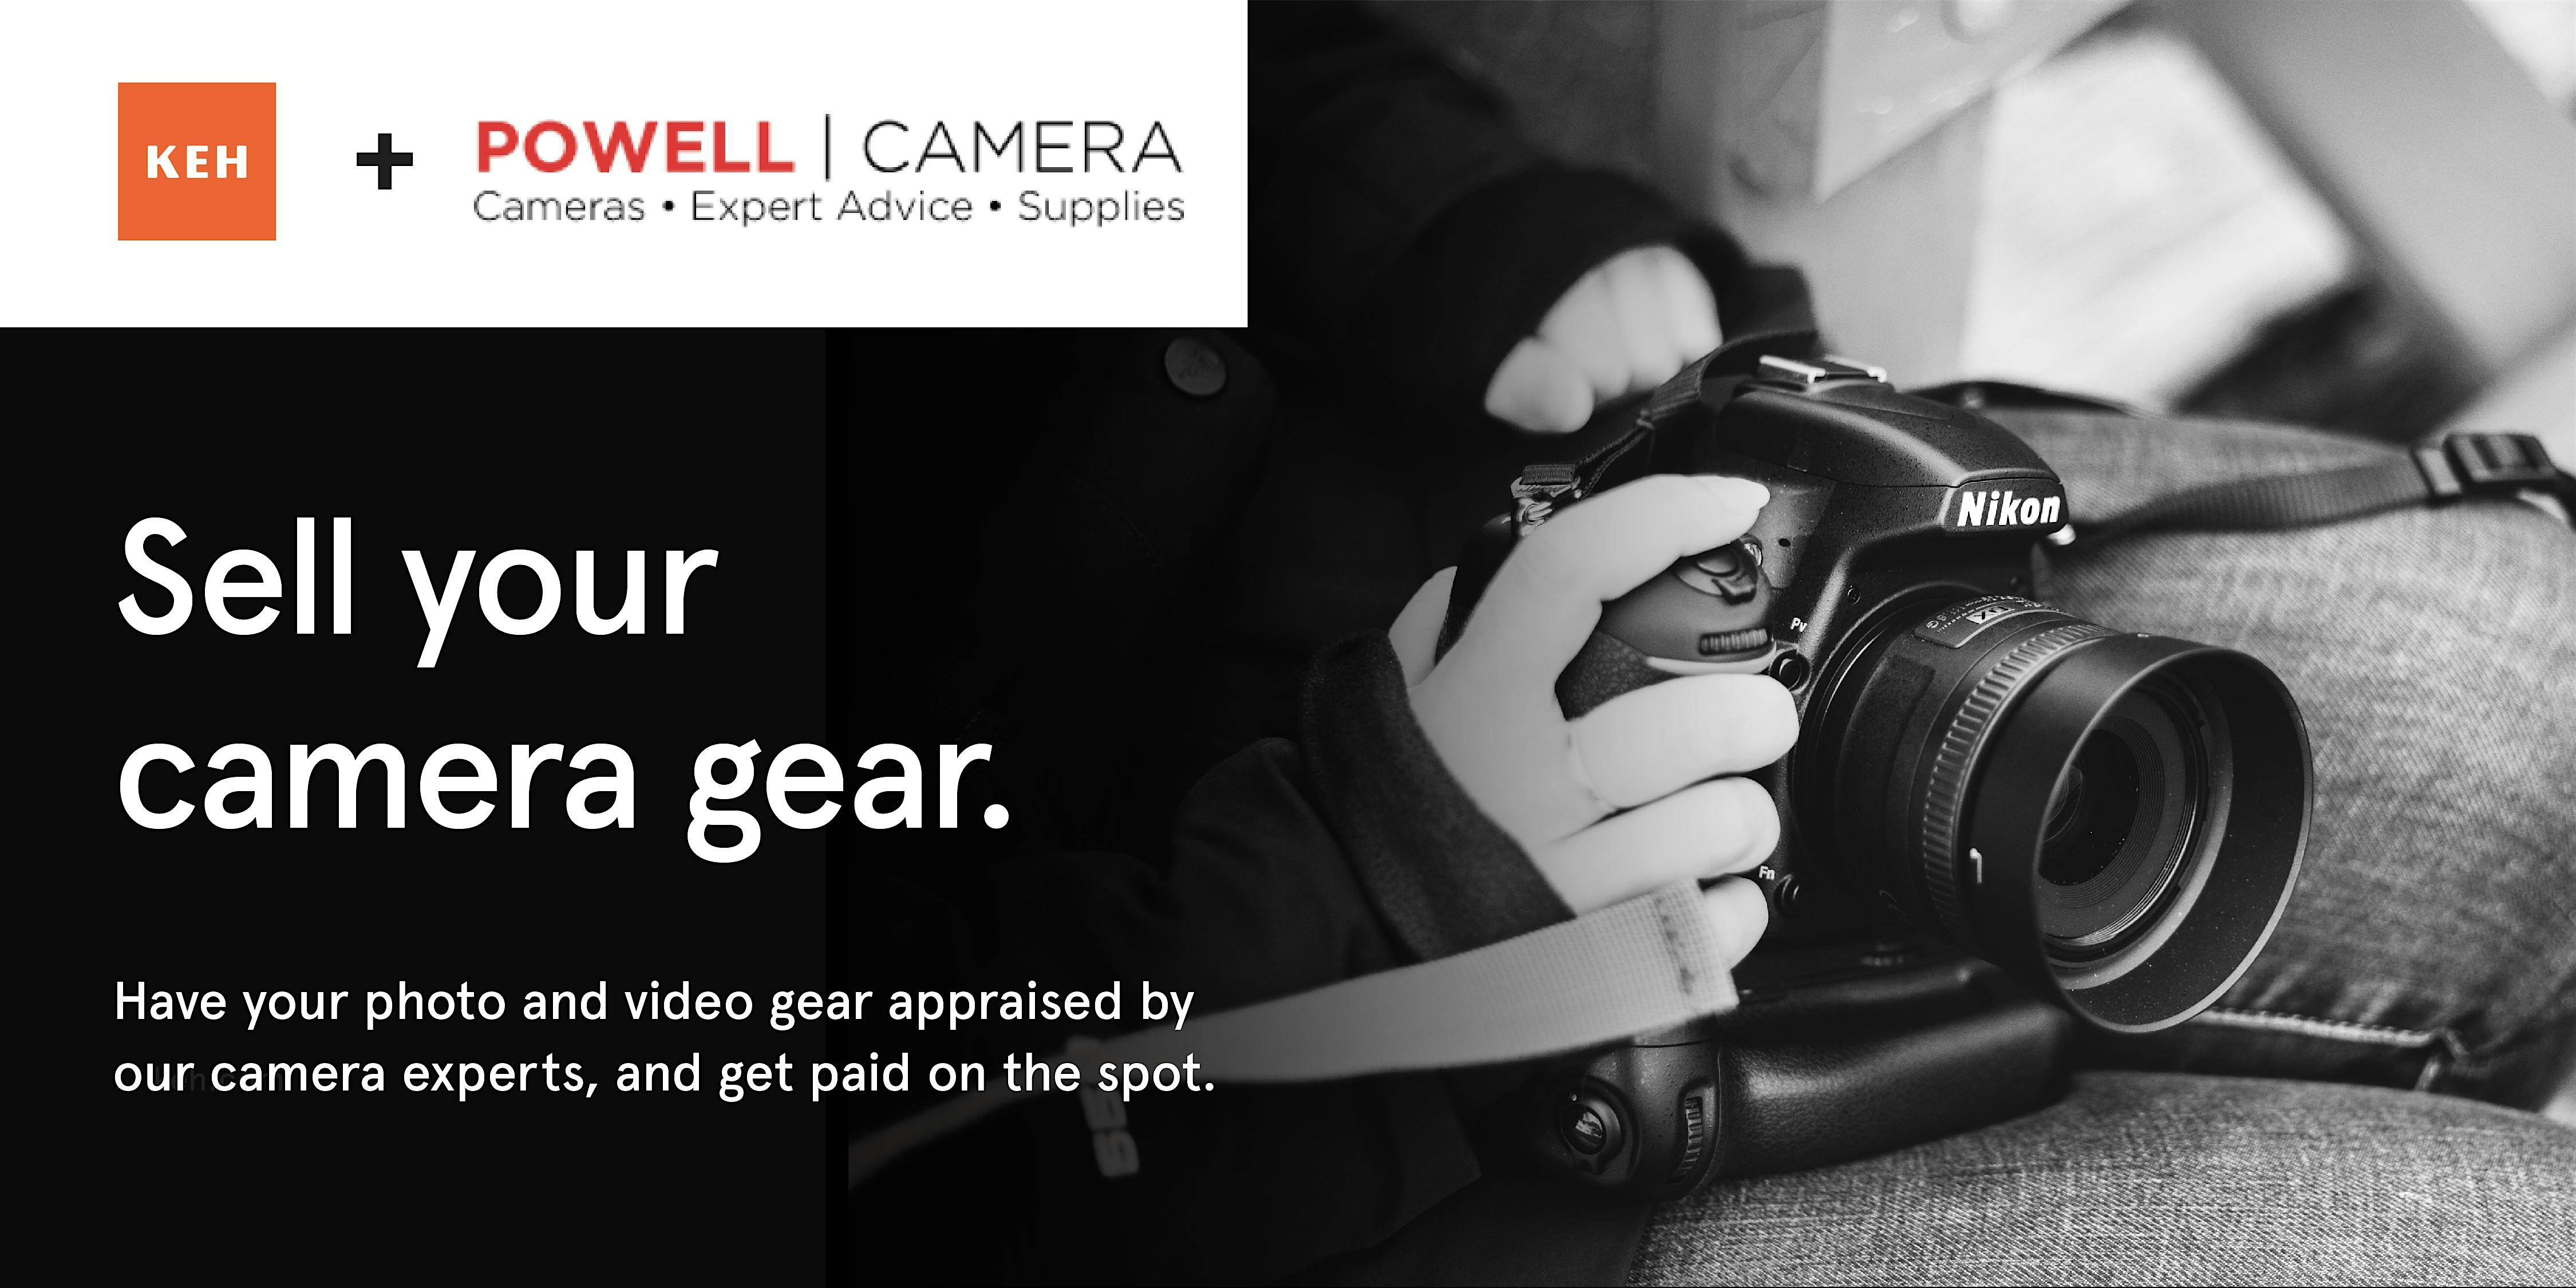 Sell your camera gear (free event) at Powell Camera Shop